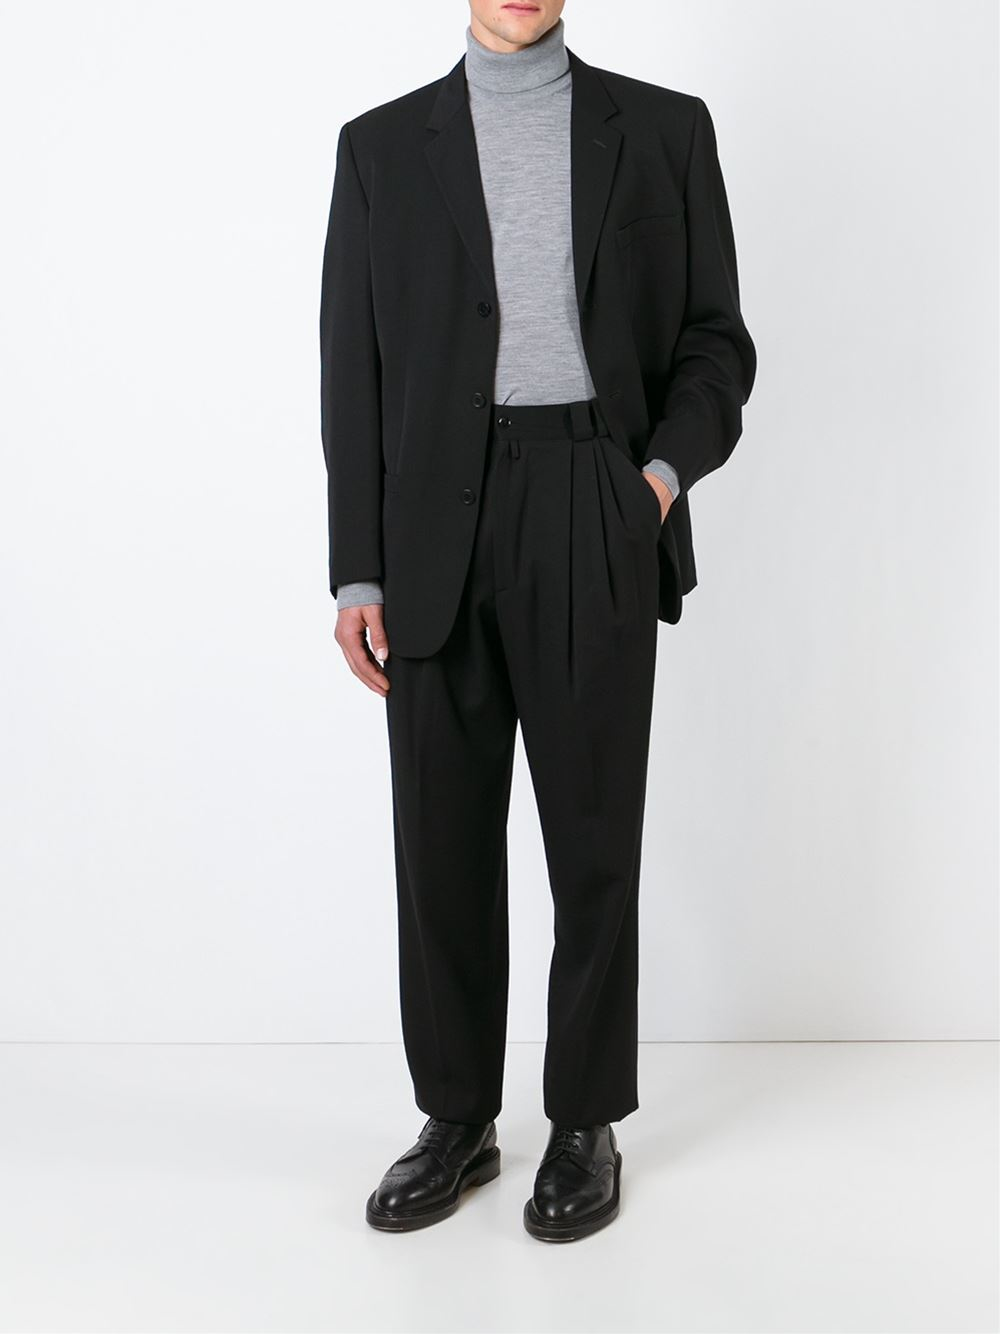 Lyst - Versace Three Button Suit in Black for Men